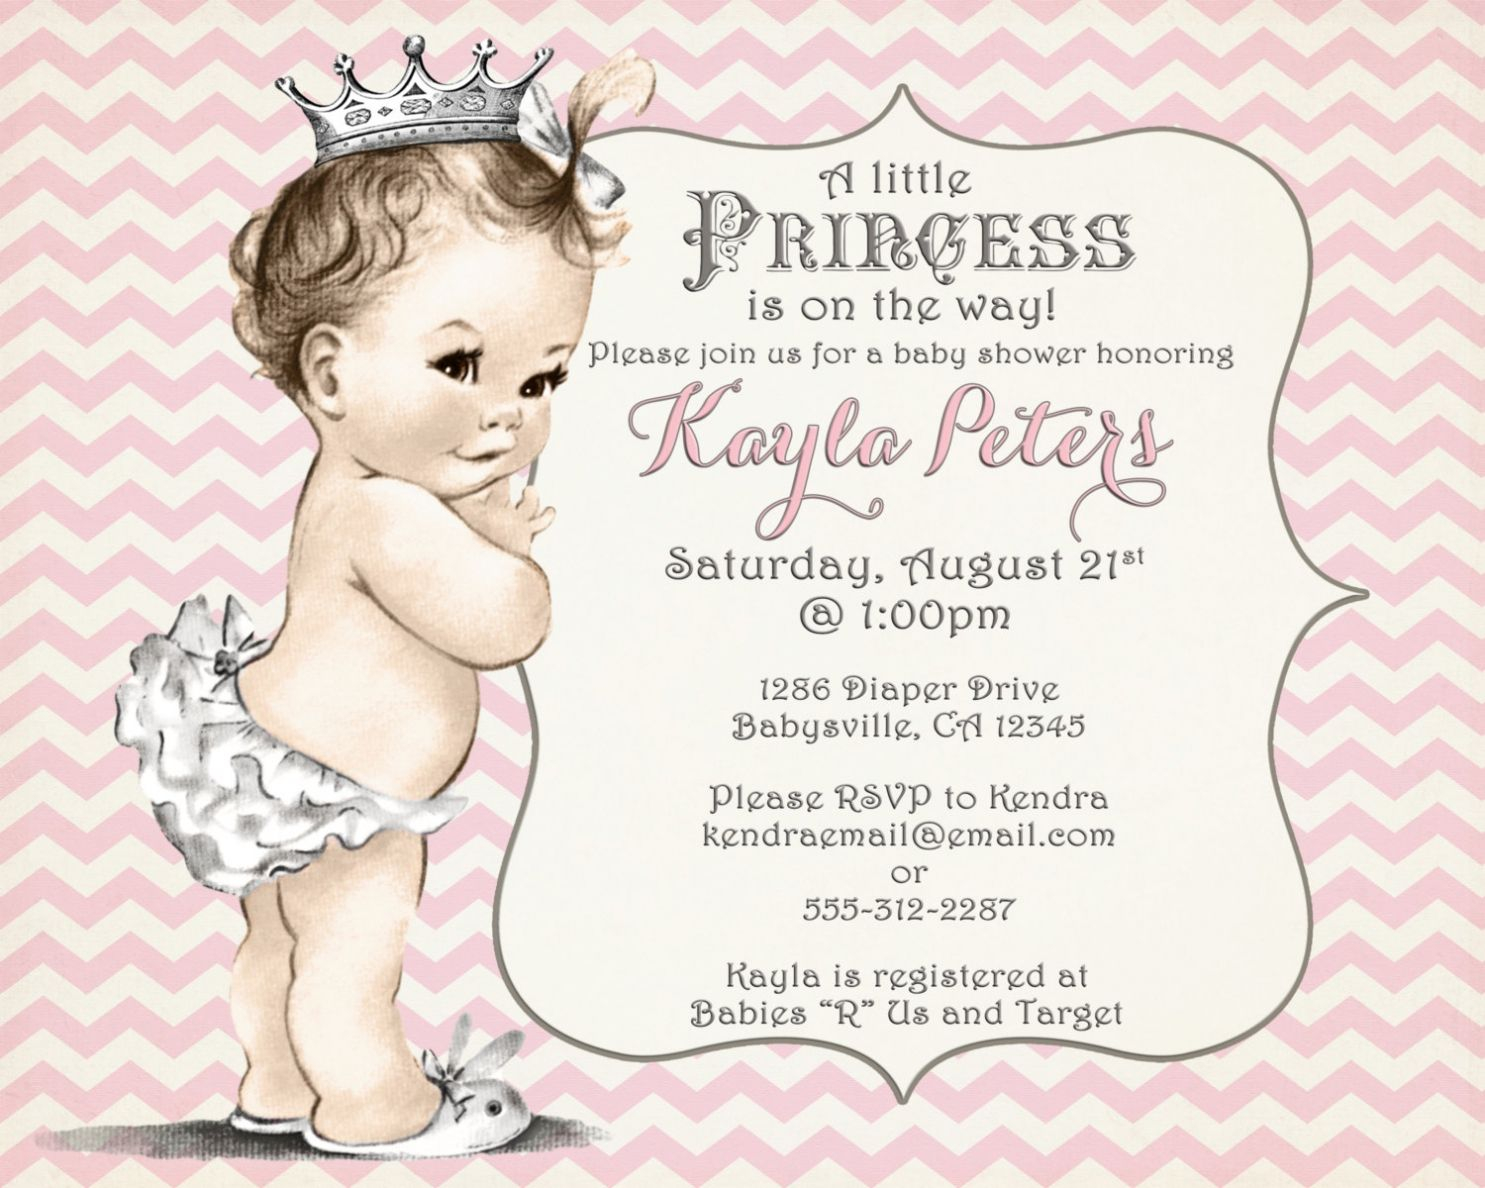 Princess Ba Shower Invitations Templates Awesome Ba Shower throughout sizing 1485 X 1188